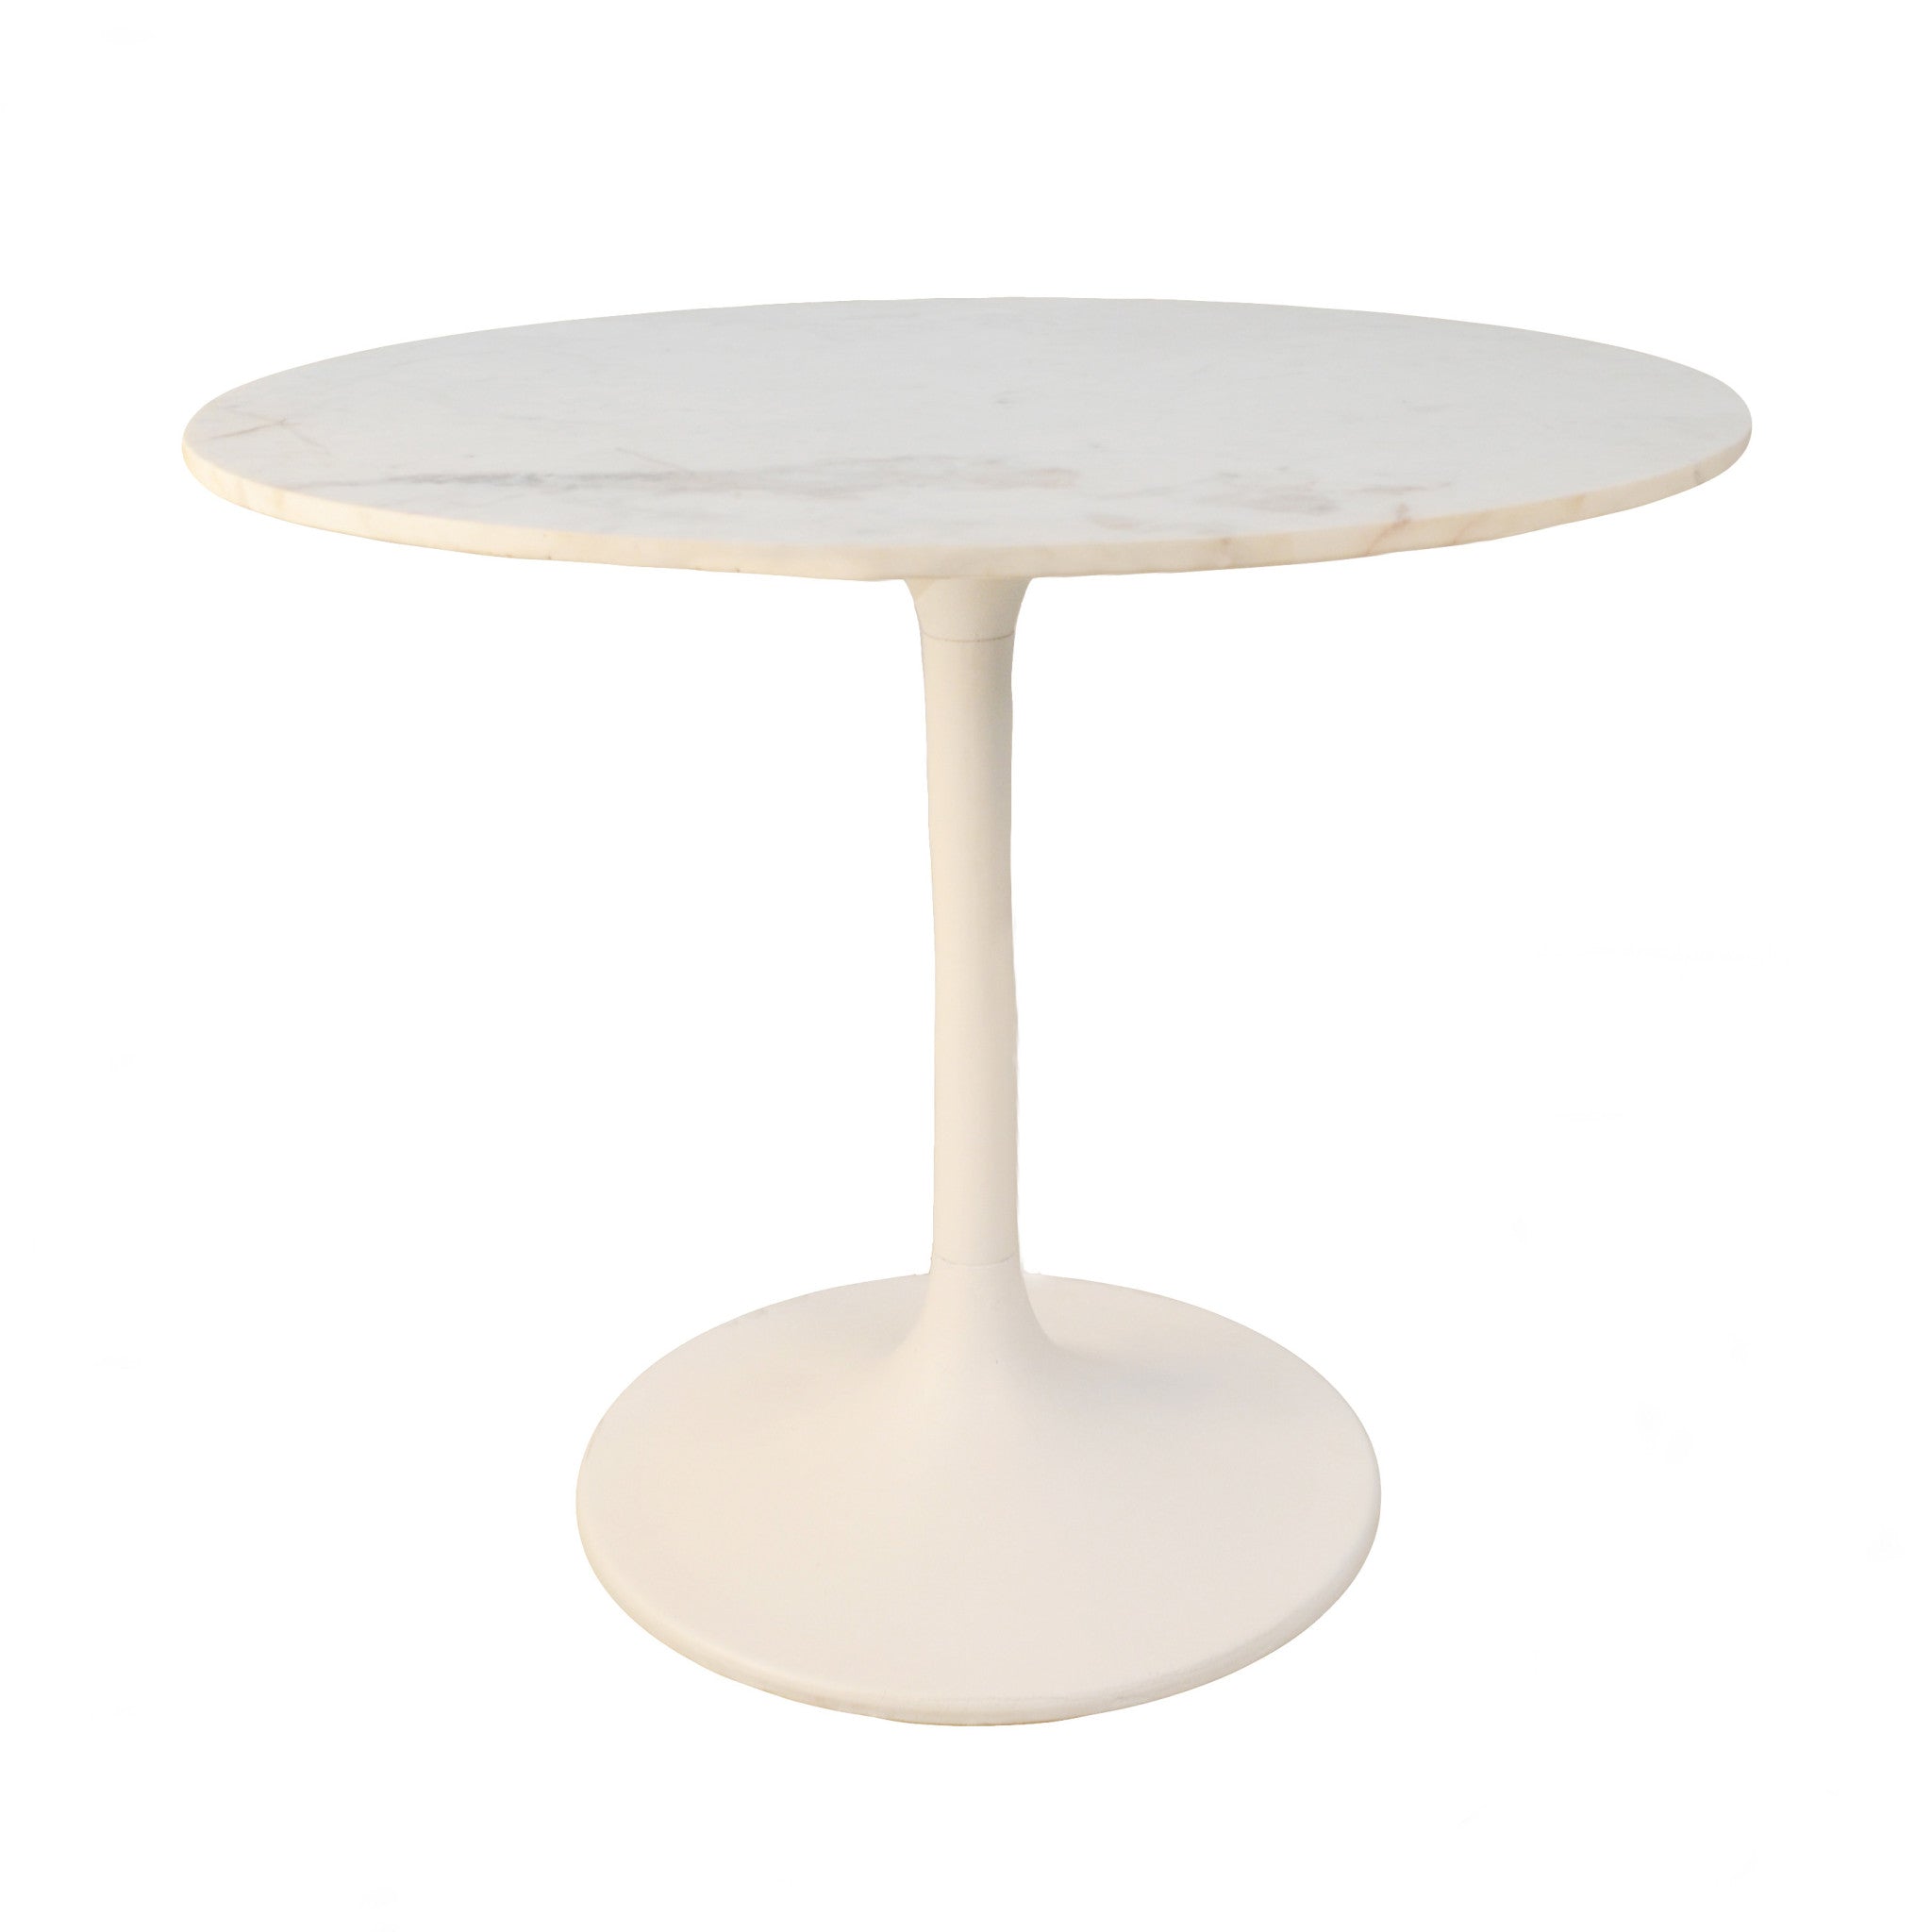 36" White Rounded Marble and Iron Pedestal Base Dining Table